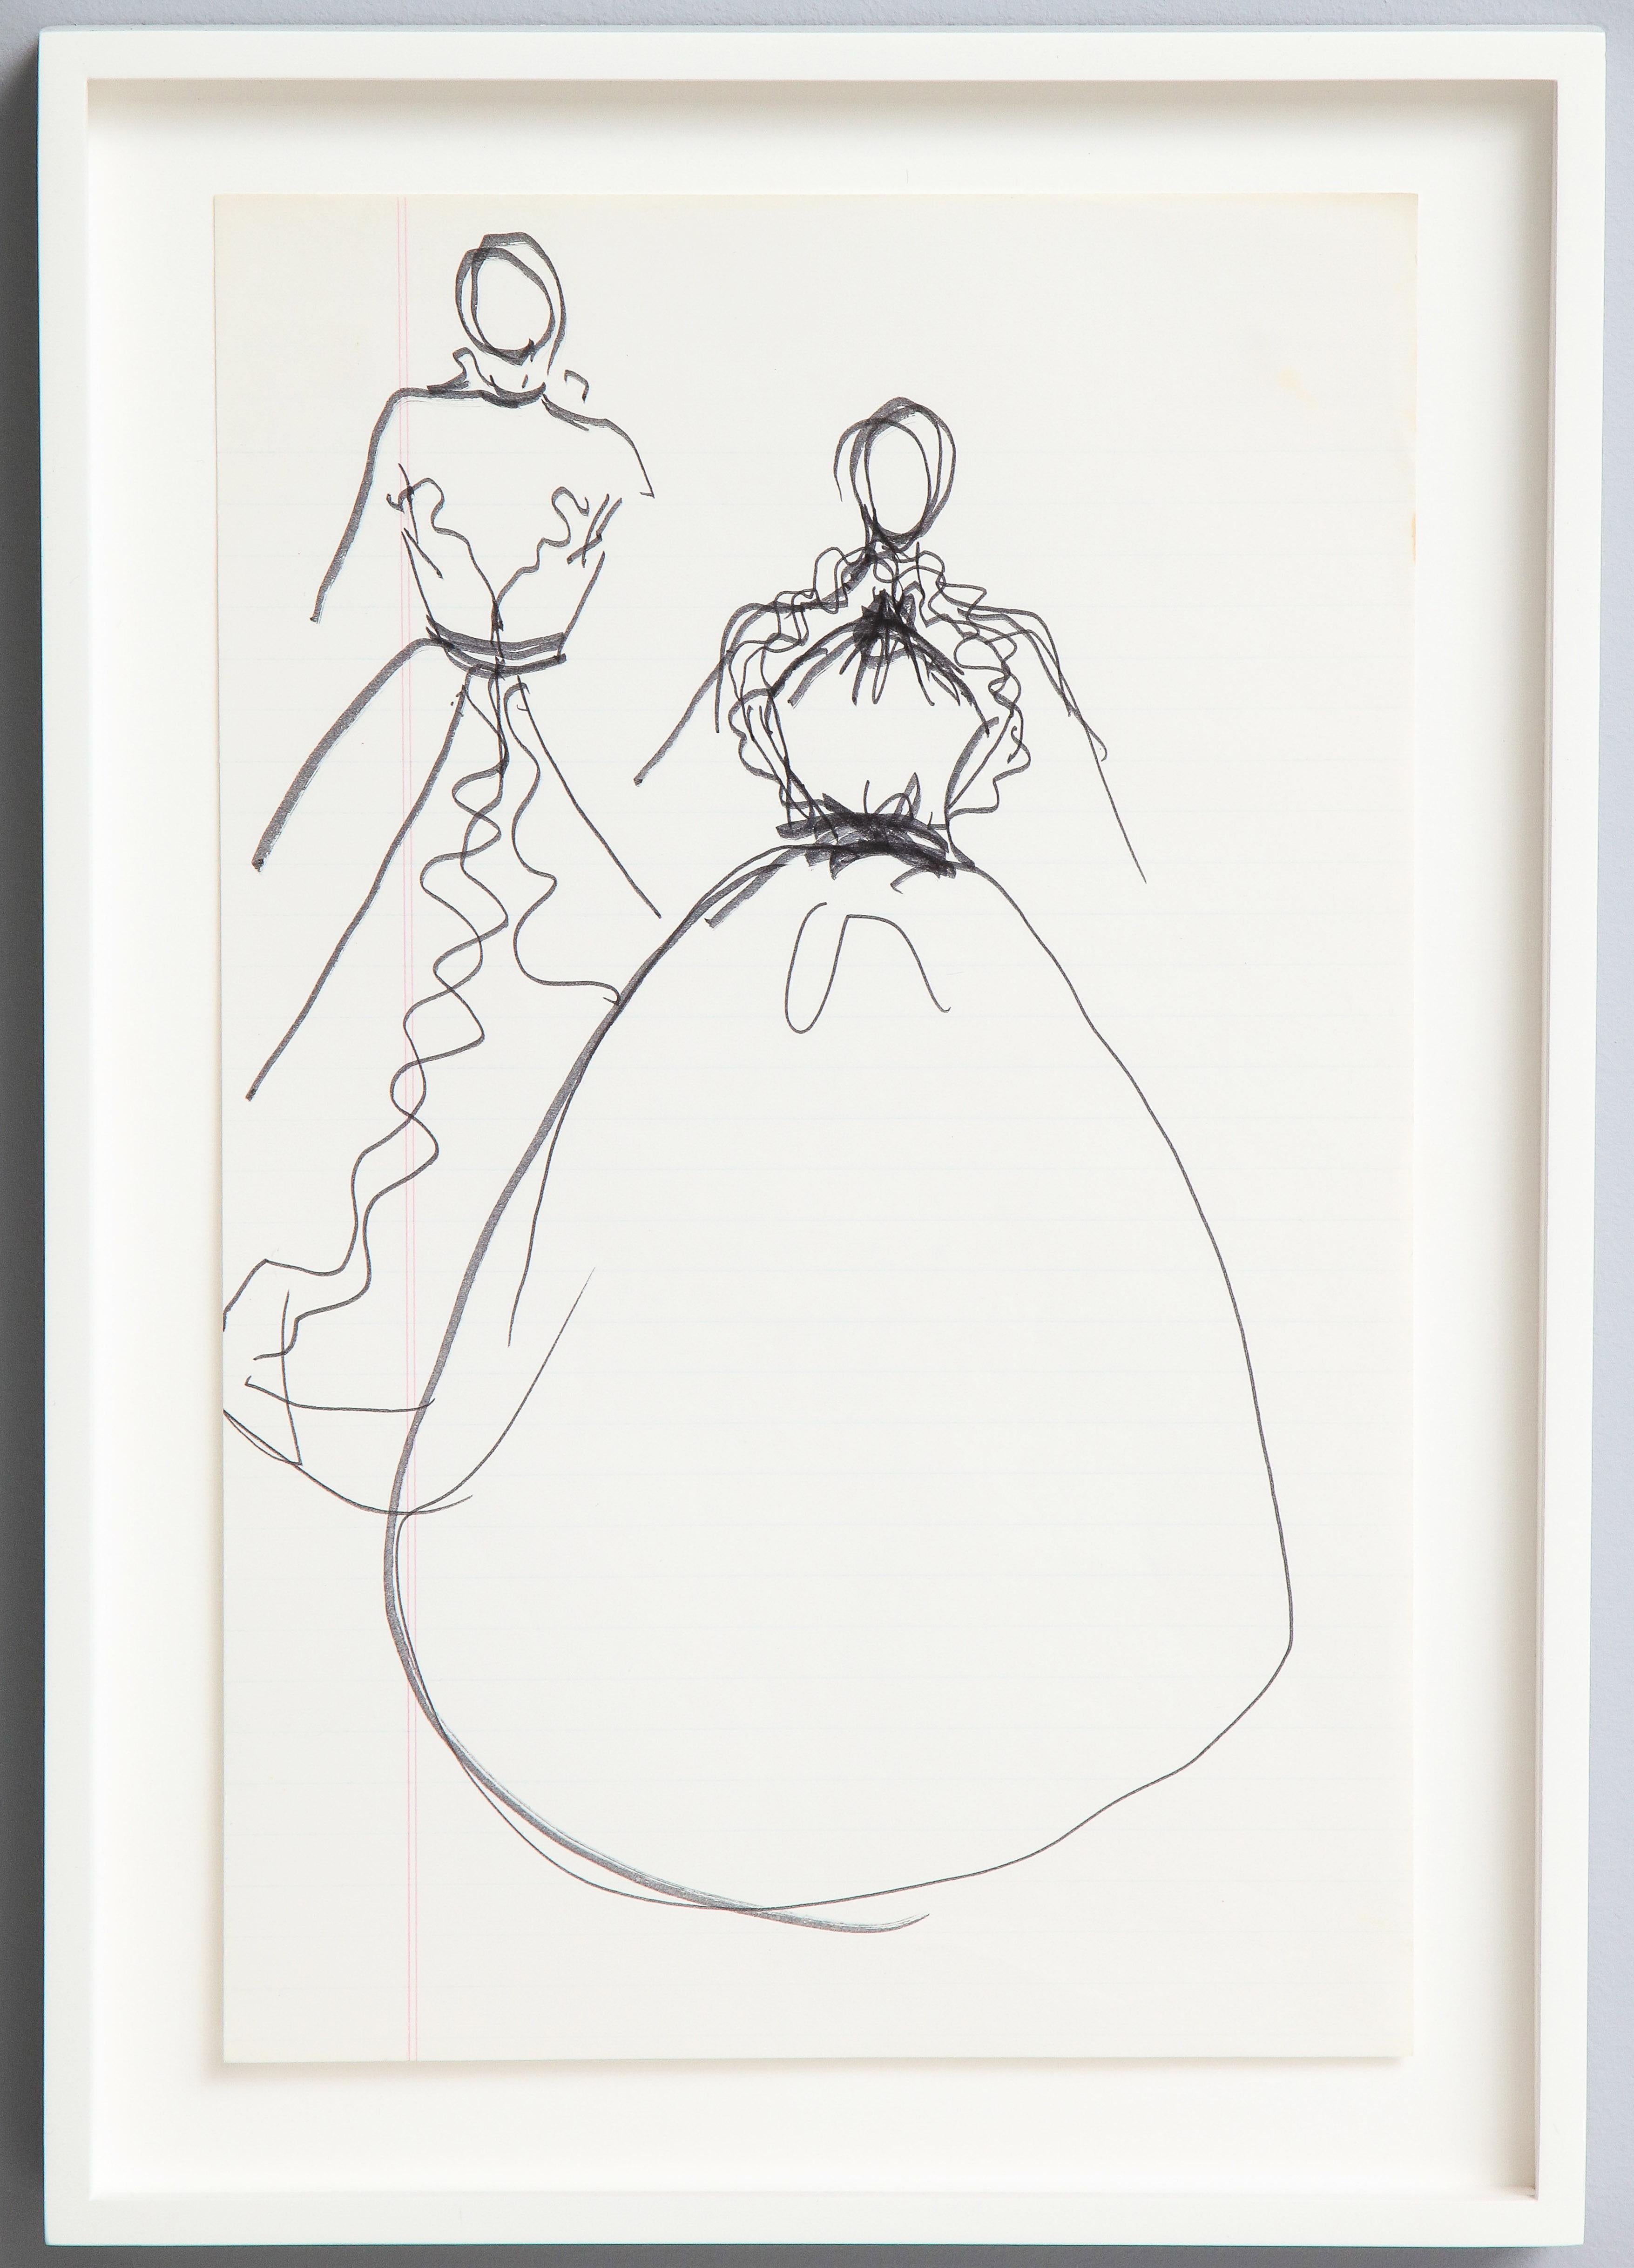 10 Ink Sketches by Iconic Fashion Designer Halston (PRICED EACH) 3